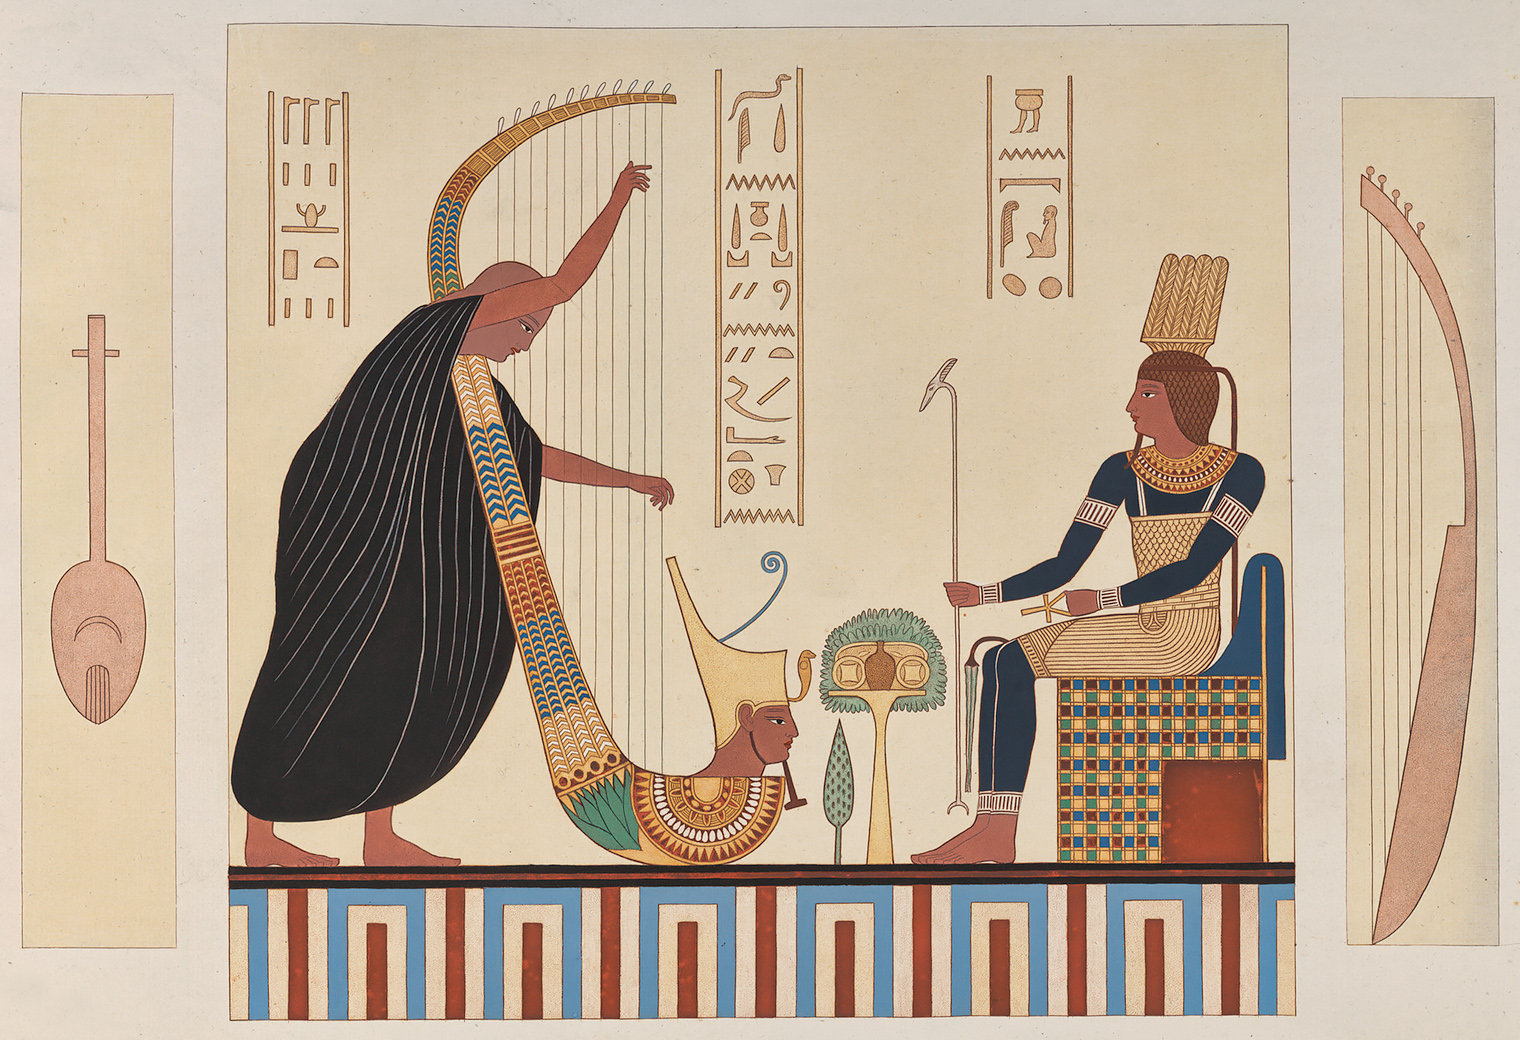 Egypian Harp | 9-string harp mural from the tomb of Rameses III, 1150 BCE | New York Public Library Digital Collection